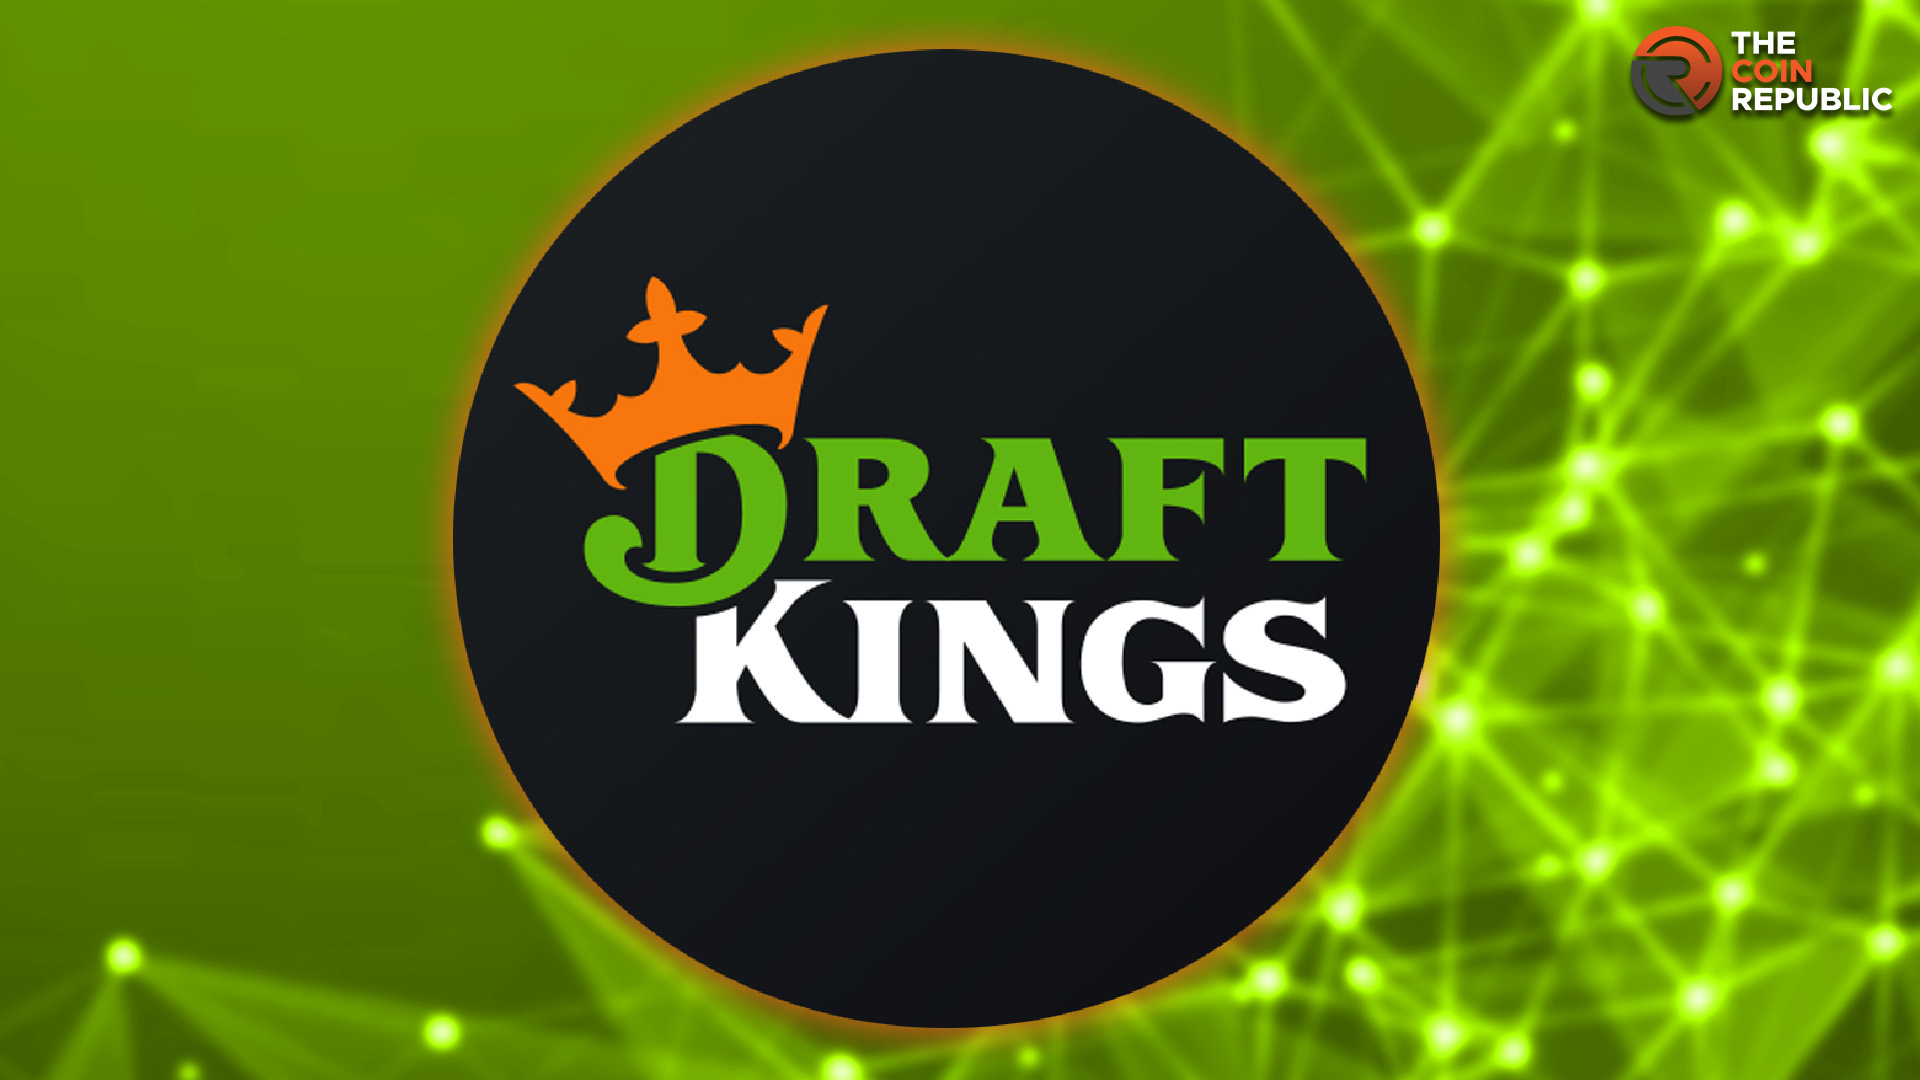 DraftKings Inc. (NASDAQ: DKNG): Will DKNG Stock Jump To $50?